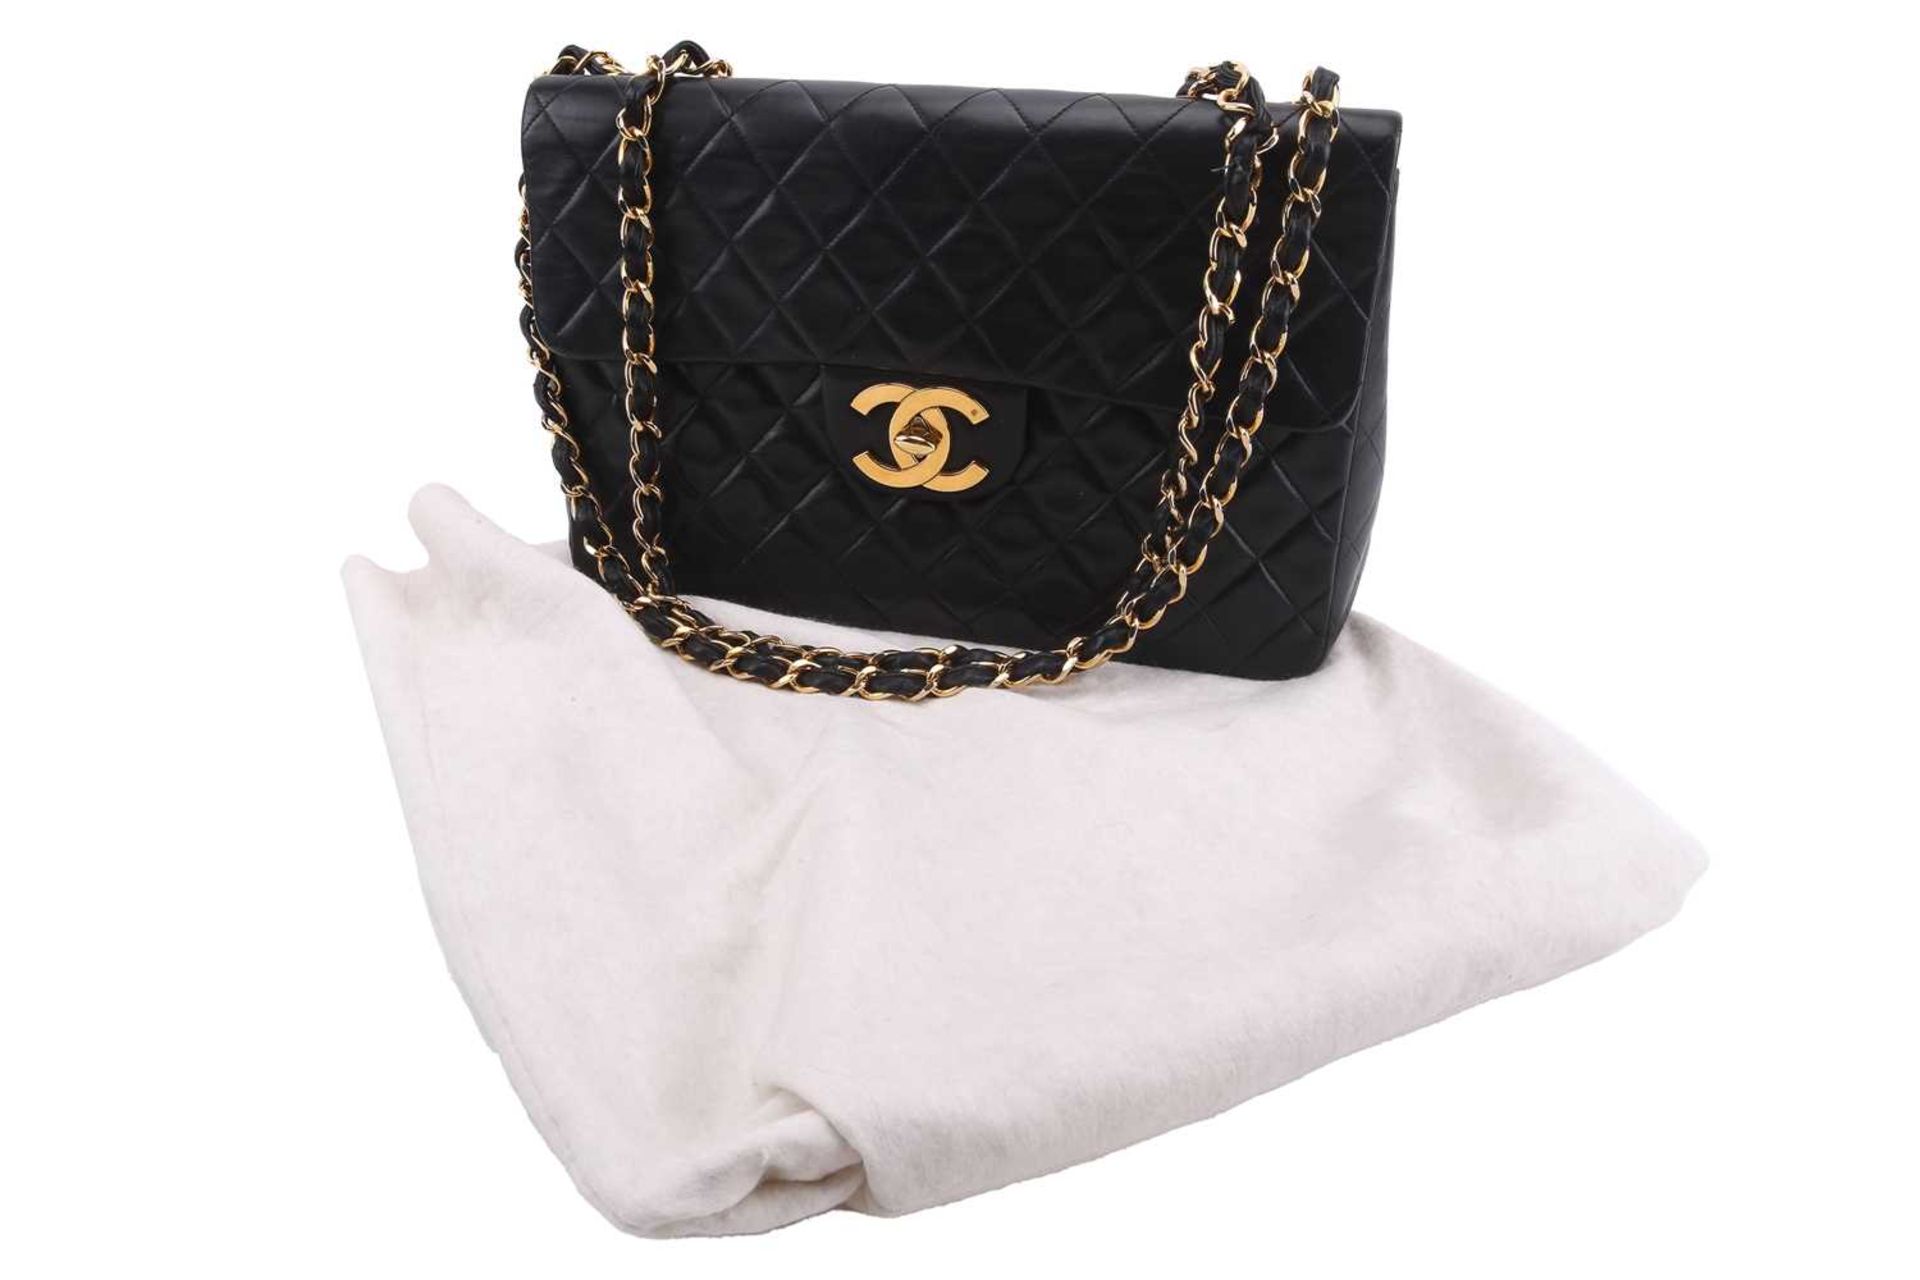 Chanel - a jumbo XL single flap bag in black diamond-quilted lambskin leather, circa 1991, - Image 14 of 15